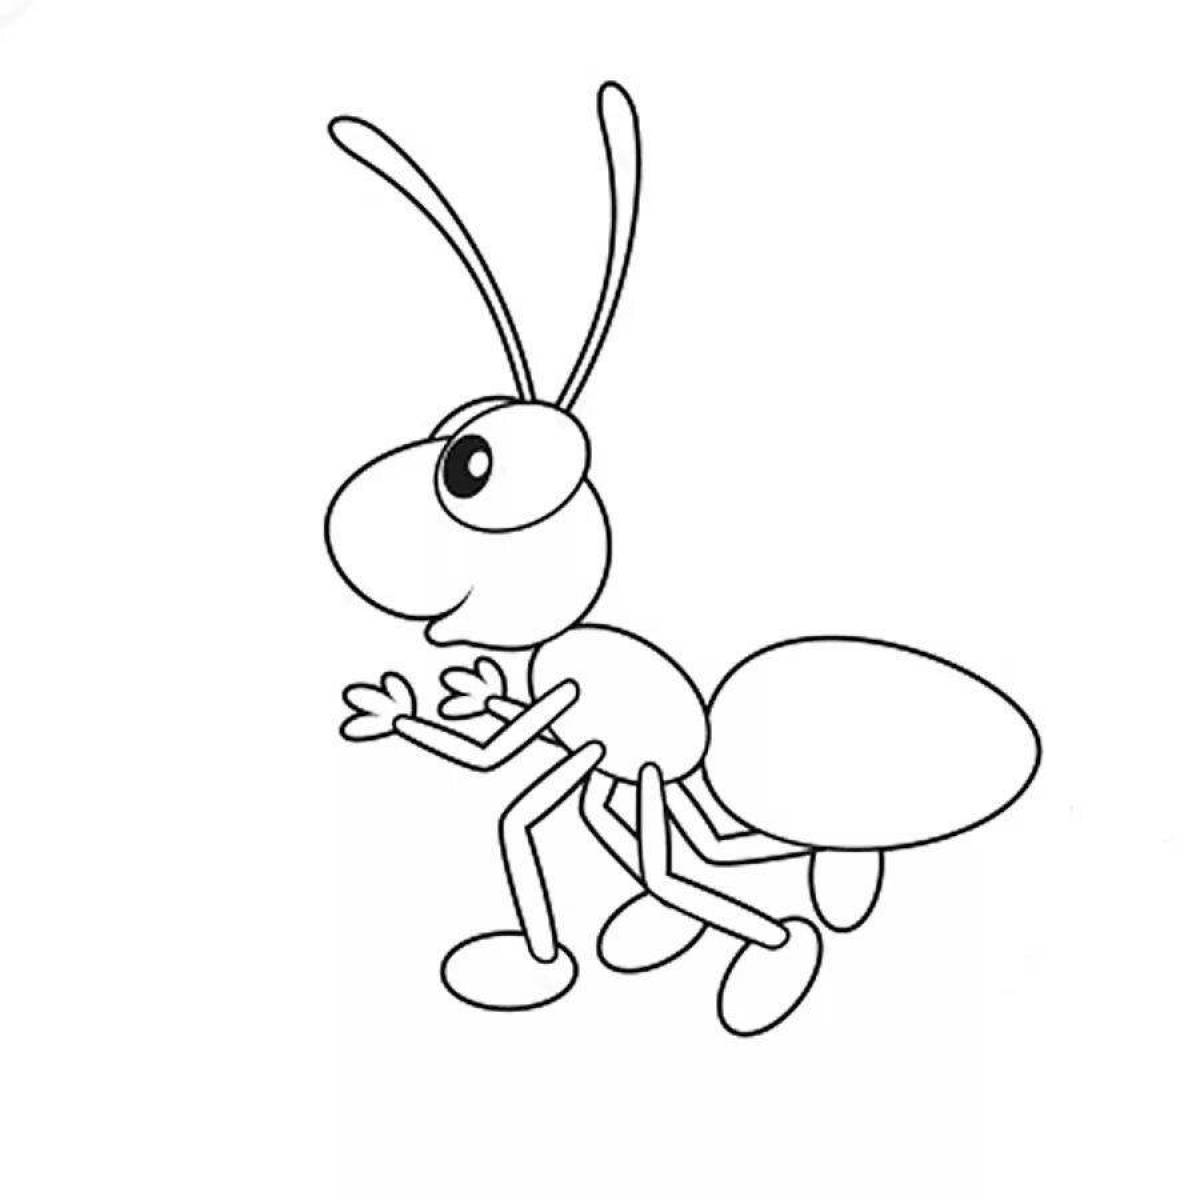 Detailed ant coloring page